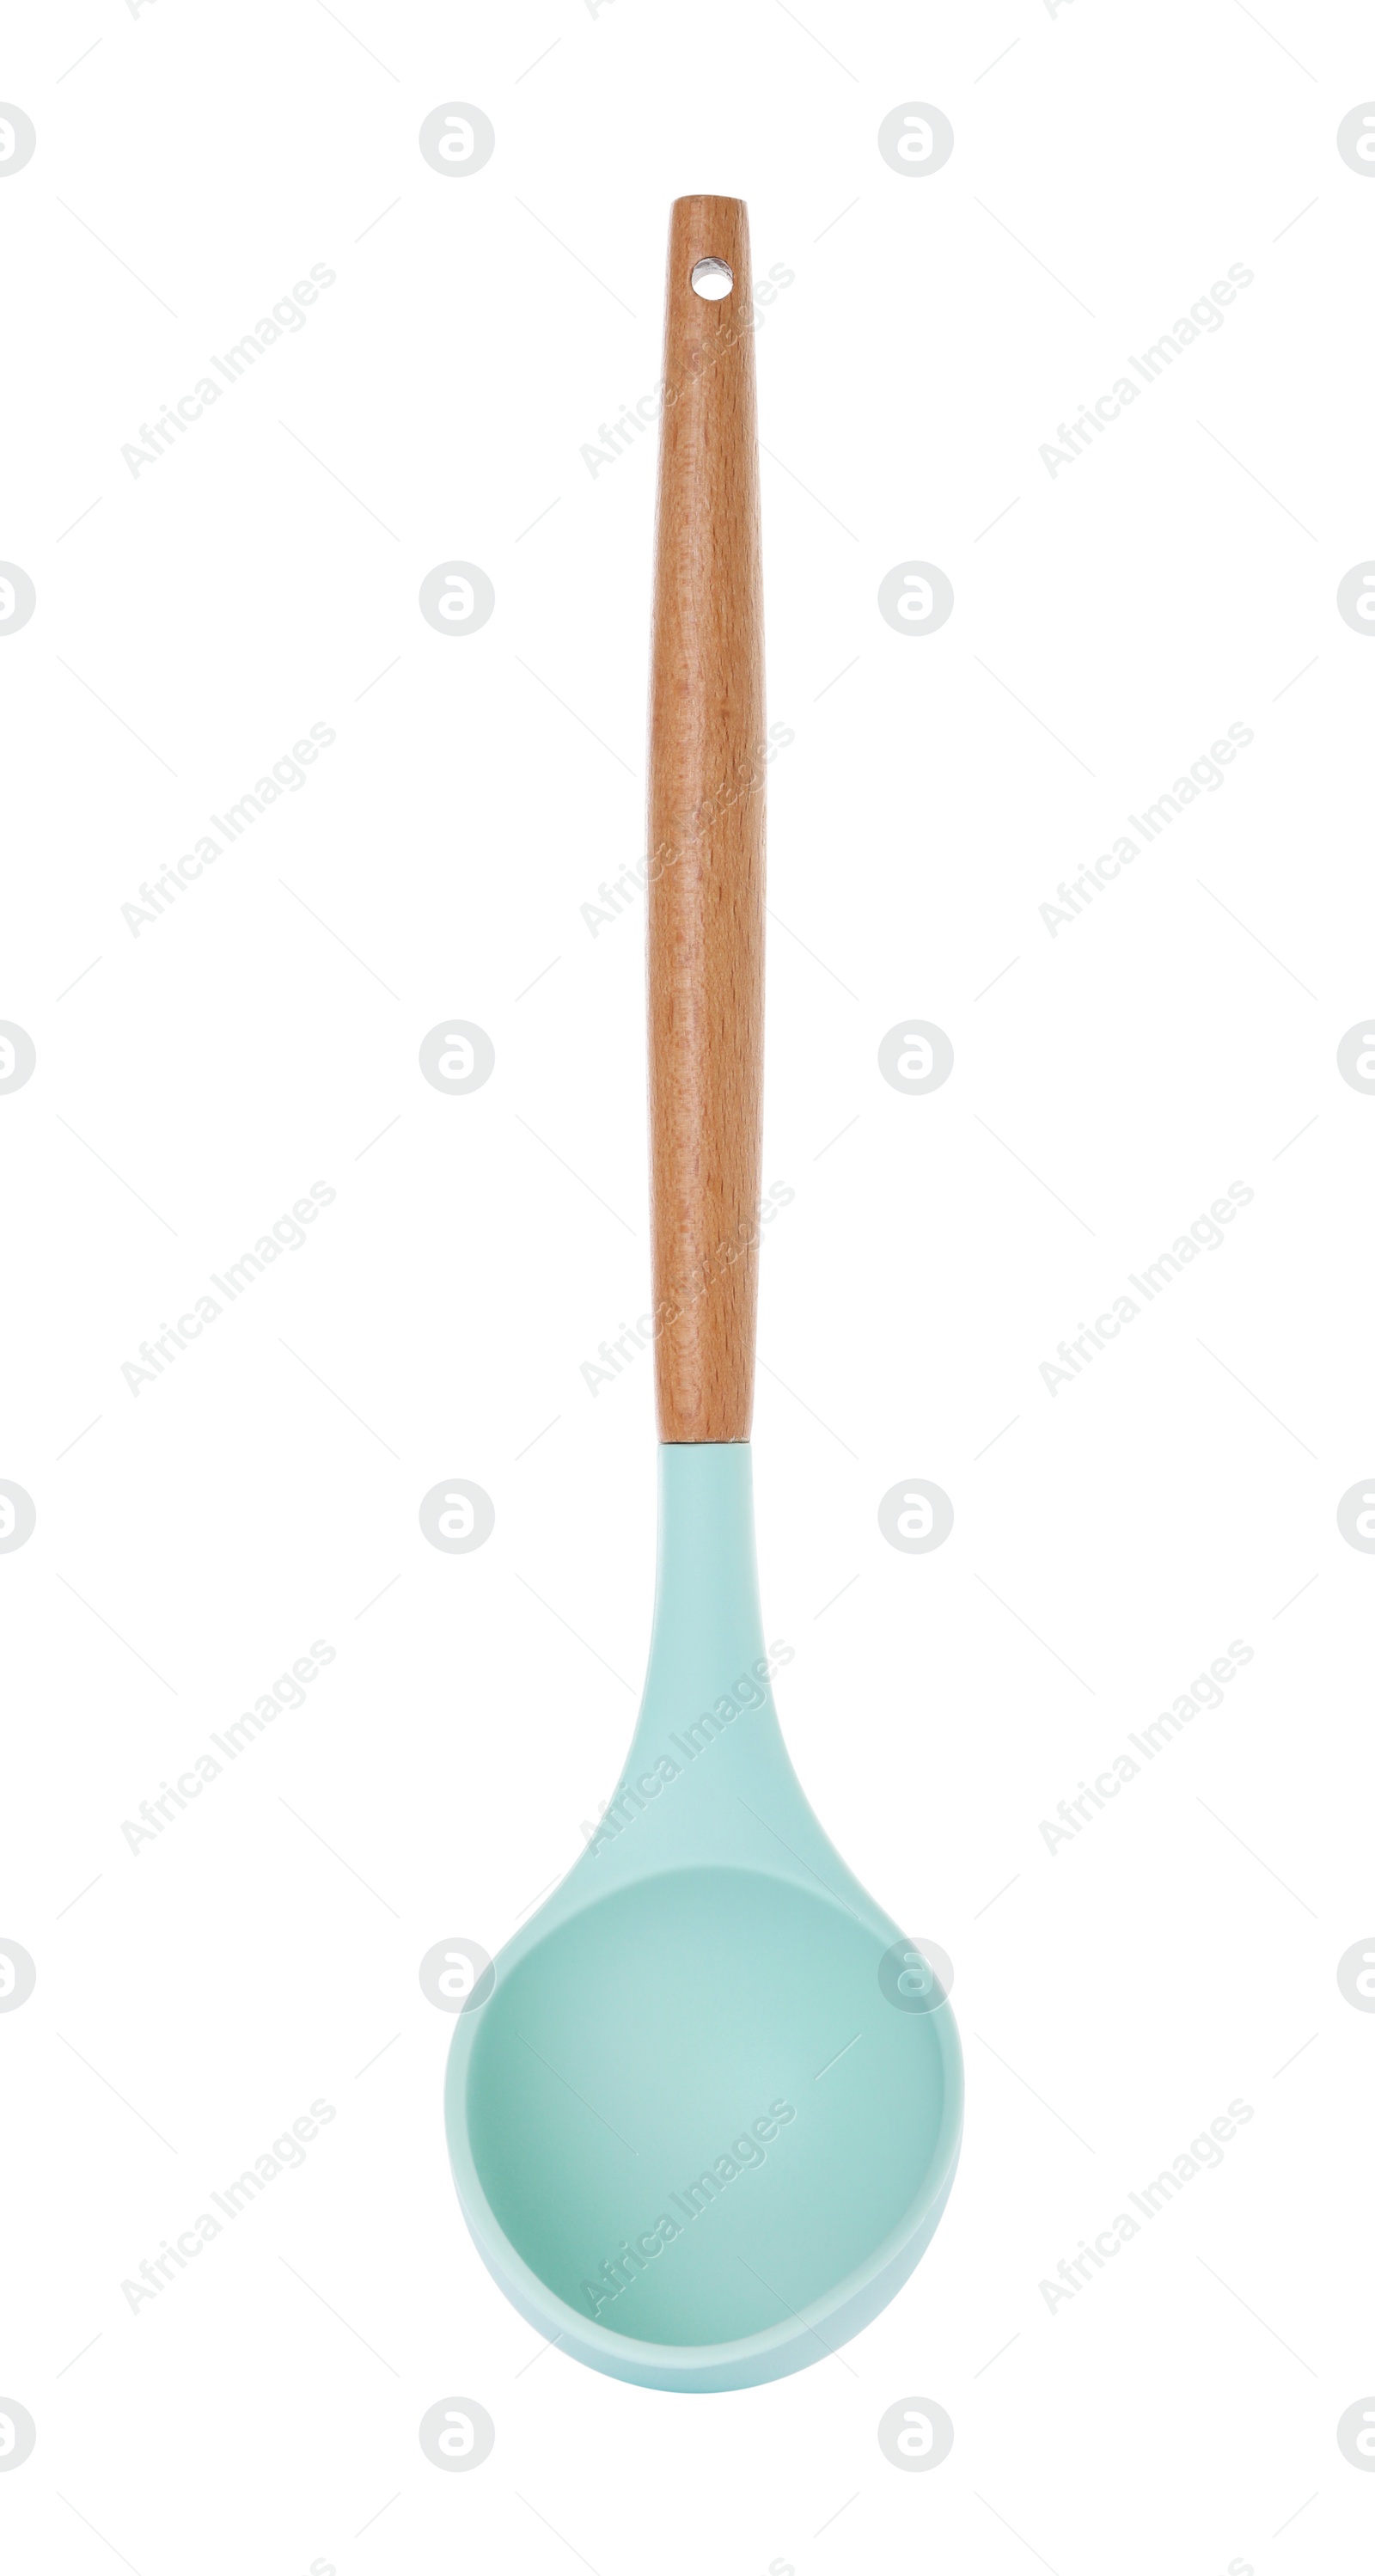 Photo of Ladle with wooden handle isolated on white. Kitchen utensil